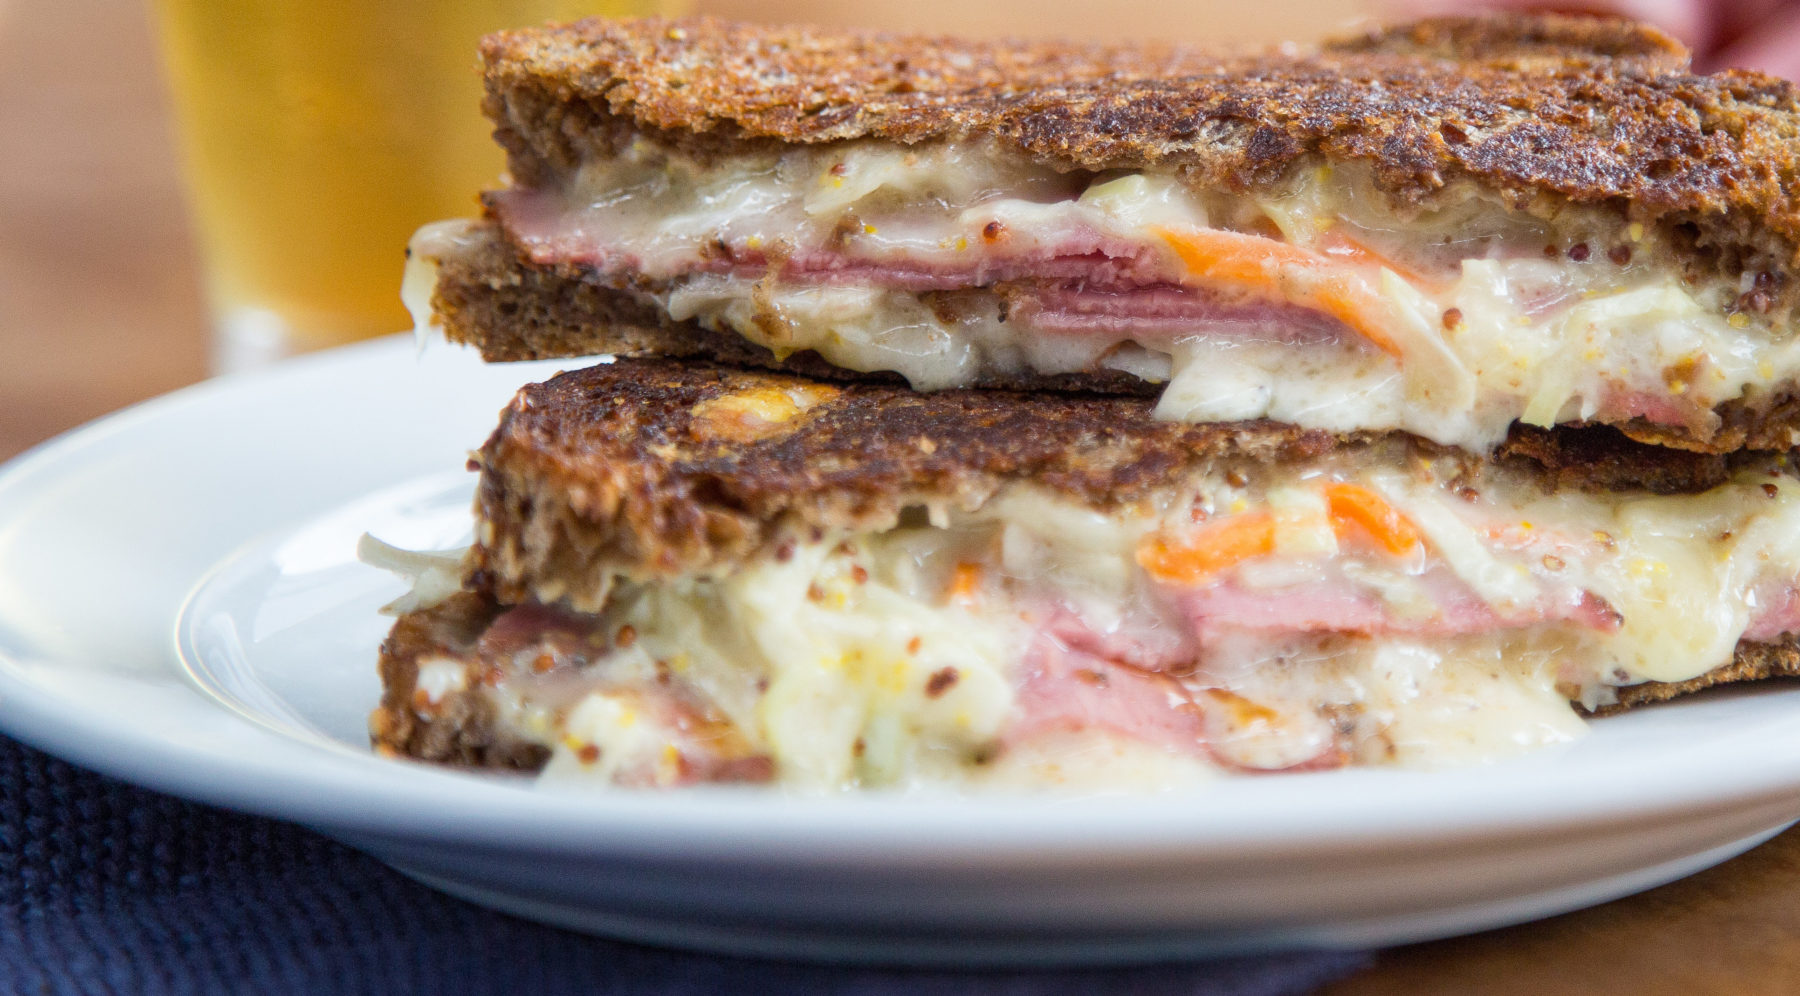 Fresh Reuben Sandwich with melted cheese